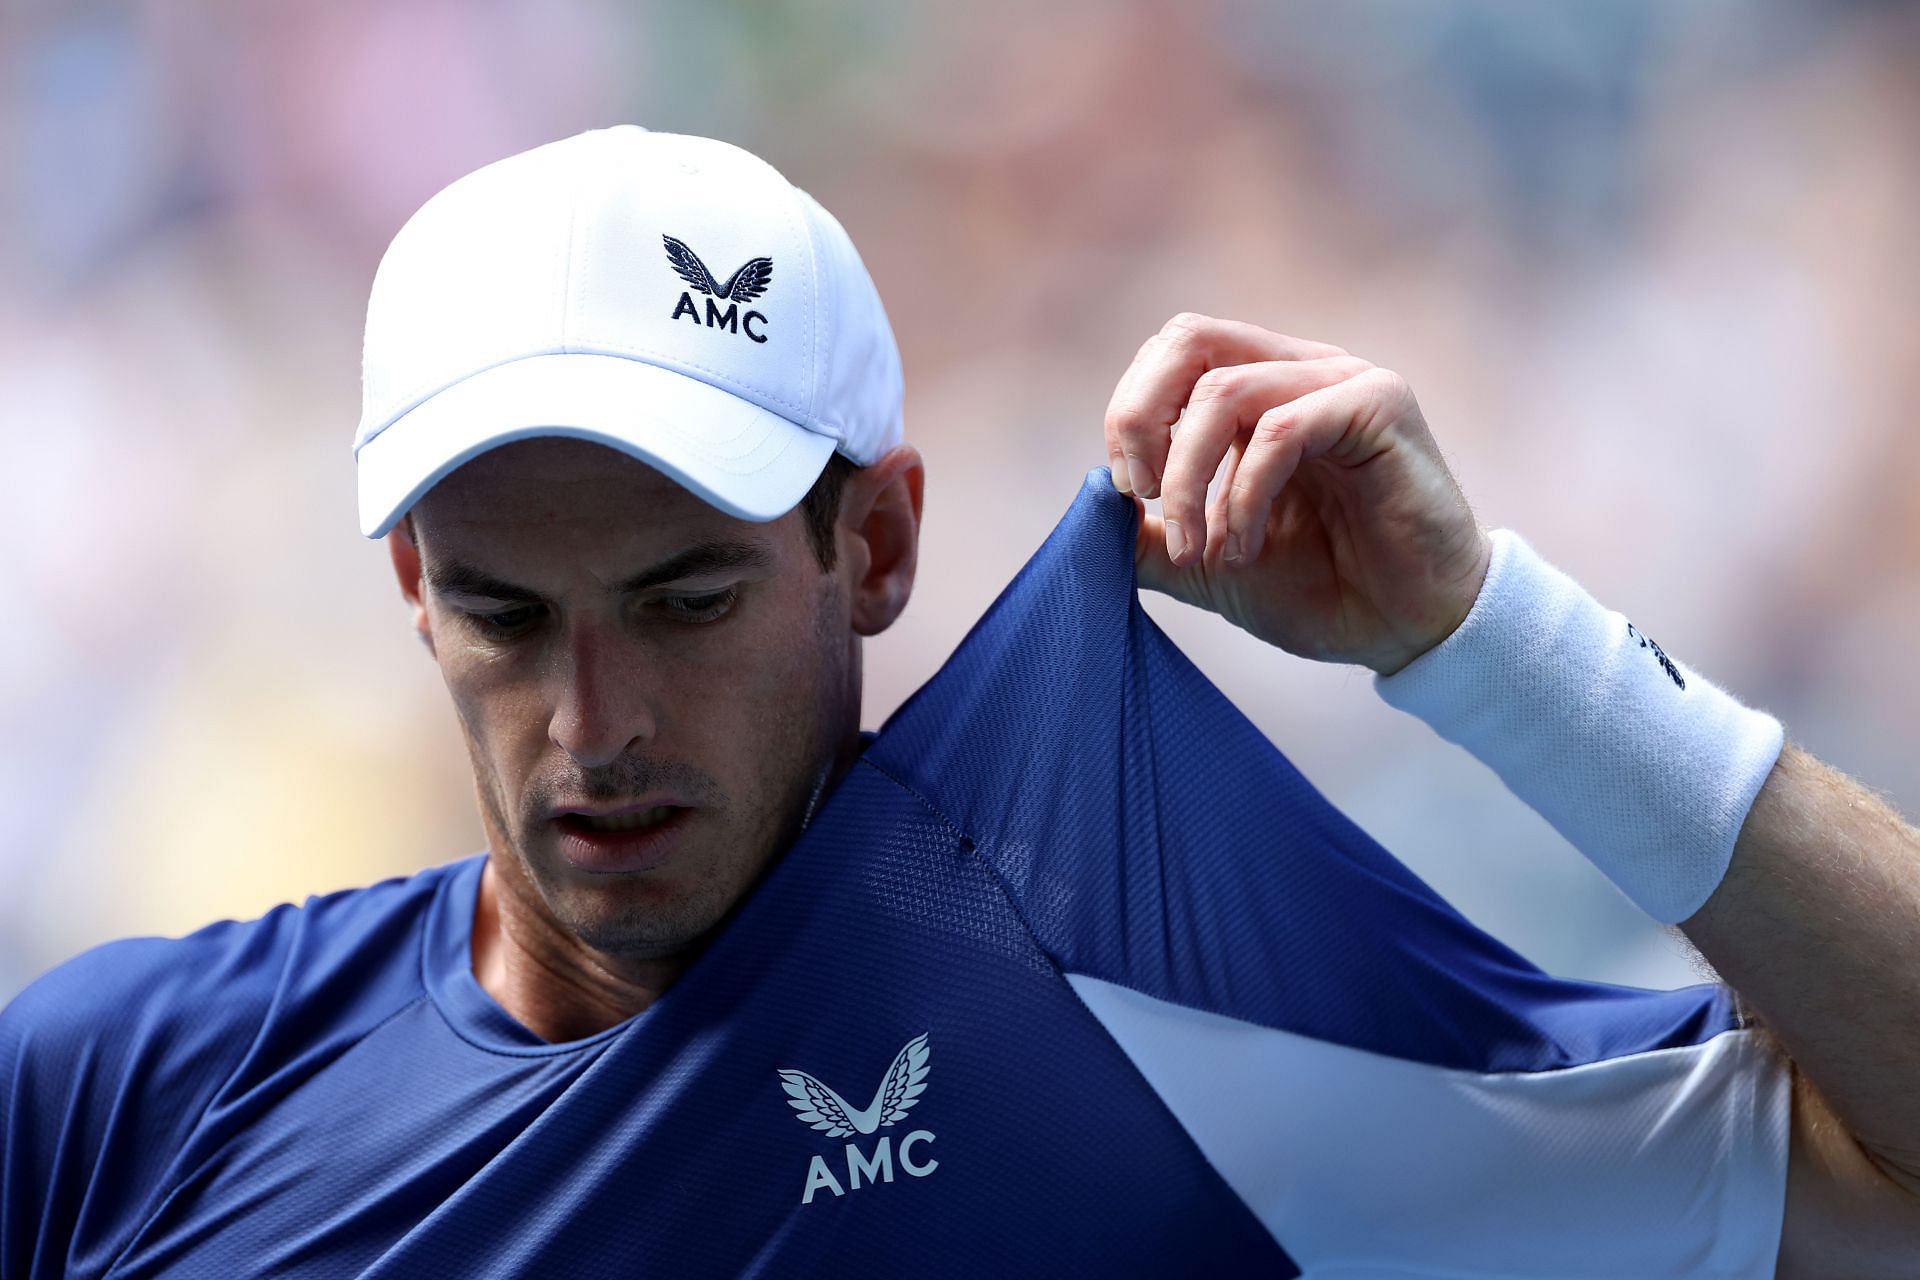 Andy Murray recorded his first straight-sets win at a Grand Slam in five years